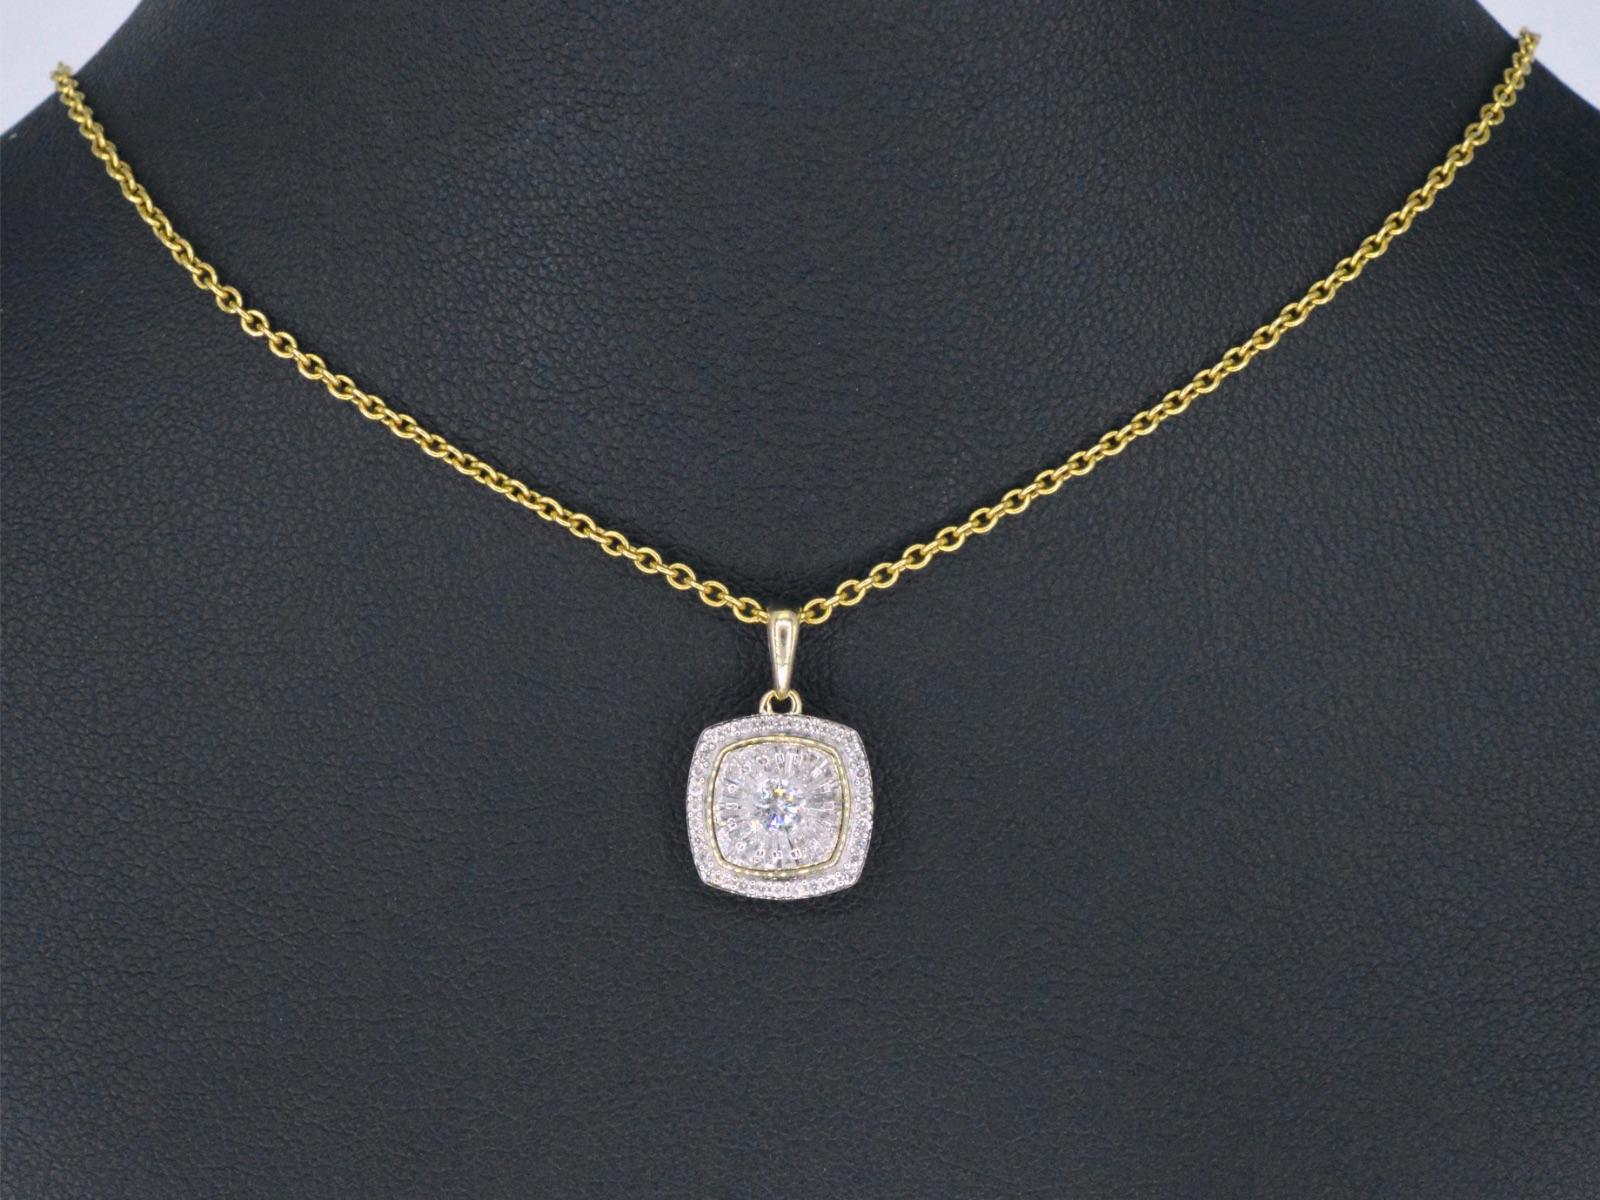 Diamonds: Naturally Shiny

Weight: 0.55 carat

Cut: Brilliant cut and Baguette cut

Colour: F-G

Clarity: SI-P

Quality: Good

Jewel: Pendant (excl. Necklace)

Weight: 1.8 gram

Measurements: 9 x 9 mm

Hallmark: 14 karat 

Condition: New

Retail